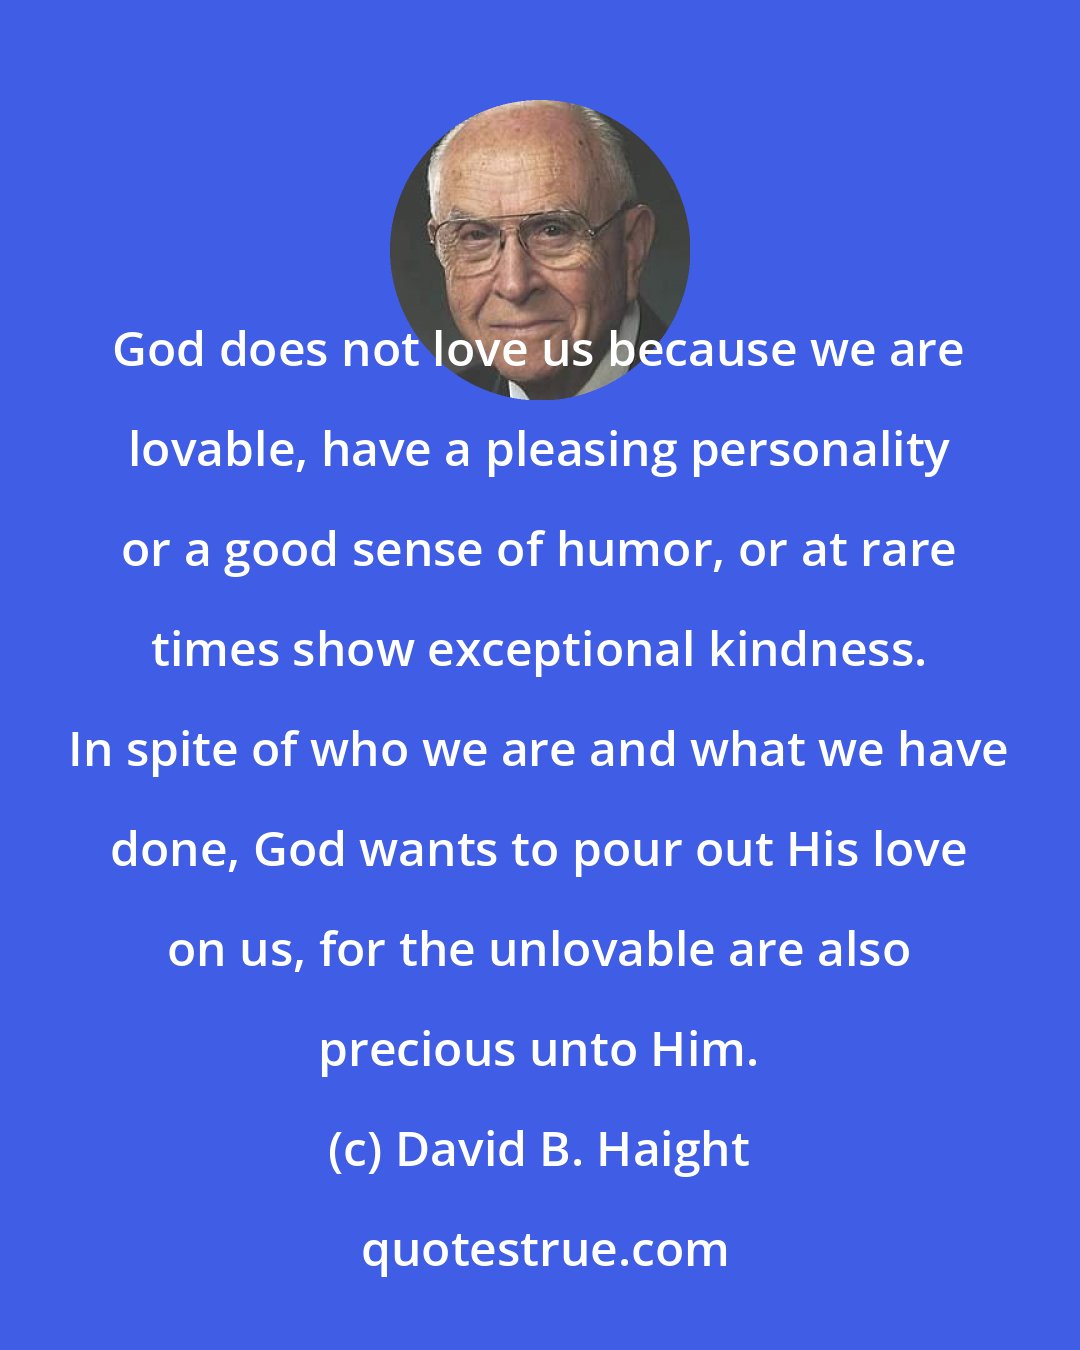 David B. Haight: God does not love us because we are lovable, have a pleasing personality or a good sense of humor, or at rare times show exceptional kindness. In spite of who we are and what we have done, God wants to pour out His love on us, for the unlovable are also precious unto Him.